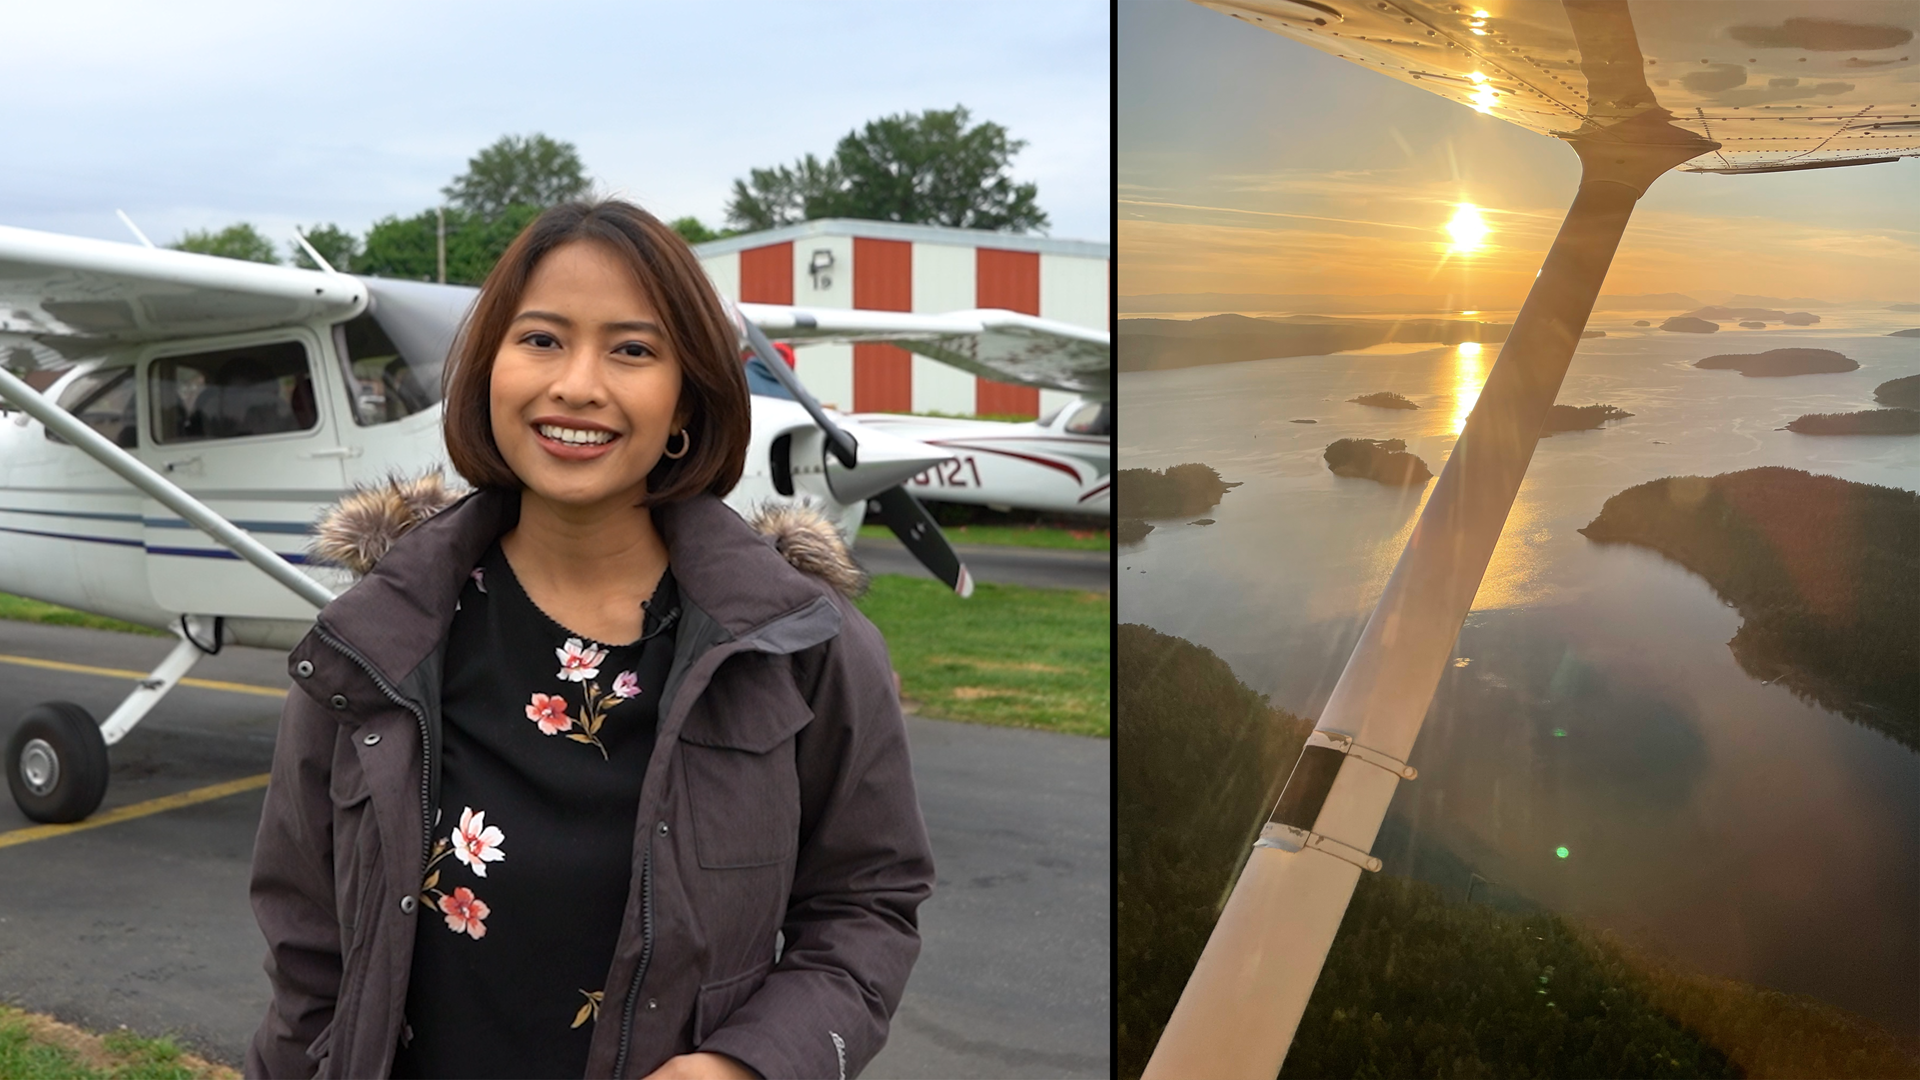 Hi, I'm Gloria Angelin, New Day's new editor and photographer. Follow me to my favorite aerial and terrestrial getaways. #newdaynw